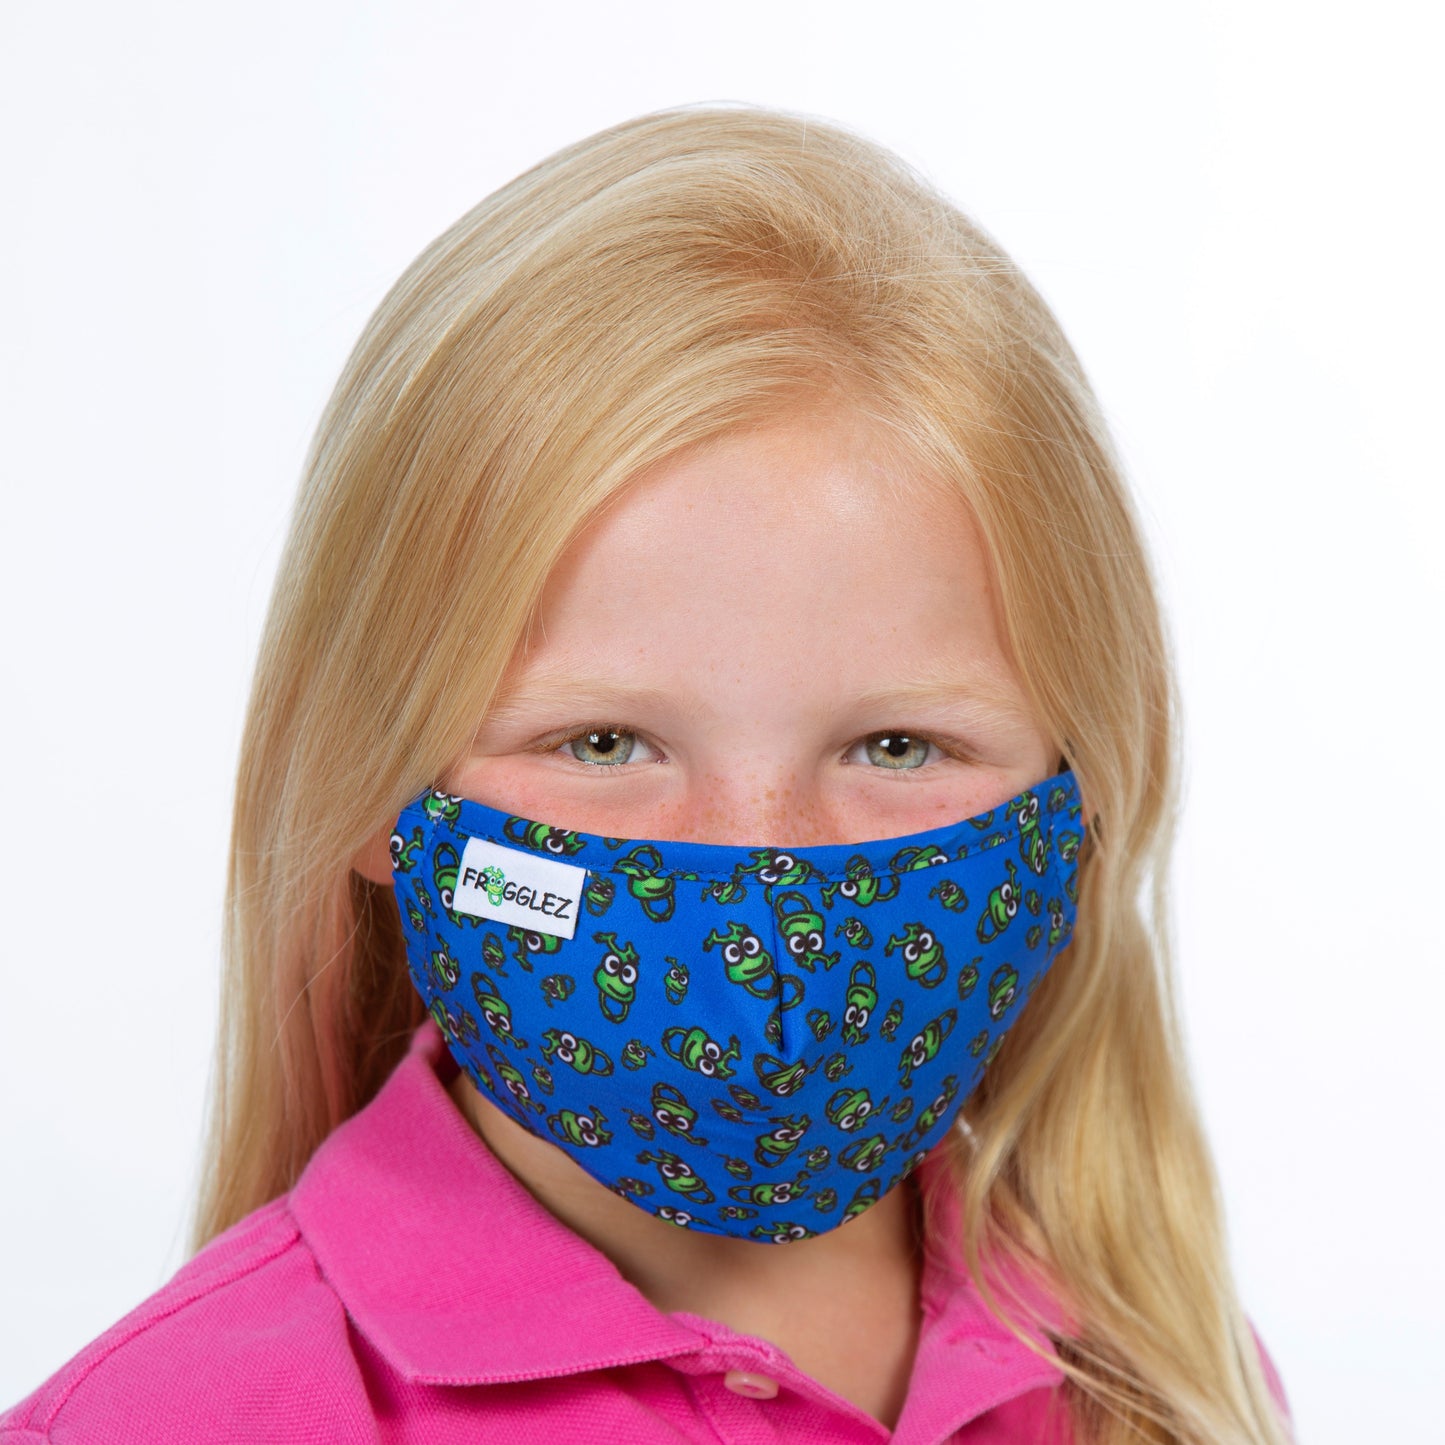 young girl wearing pink shirt and blue cloth face mask with frog print